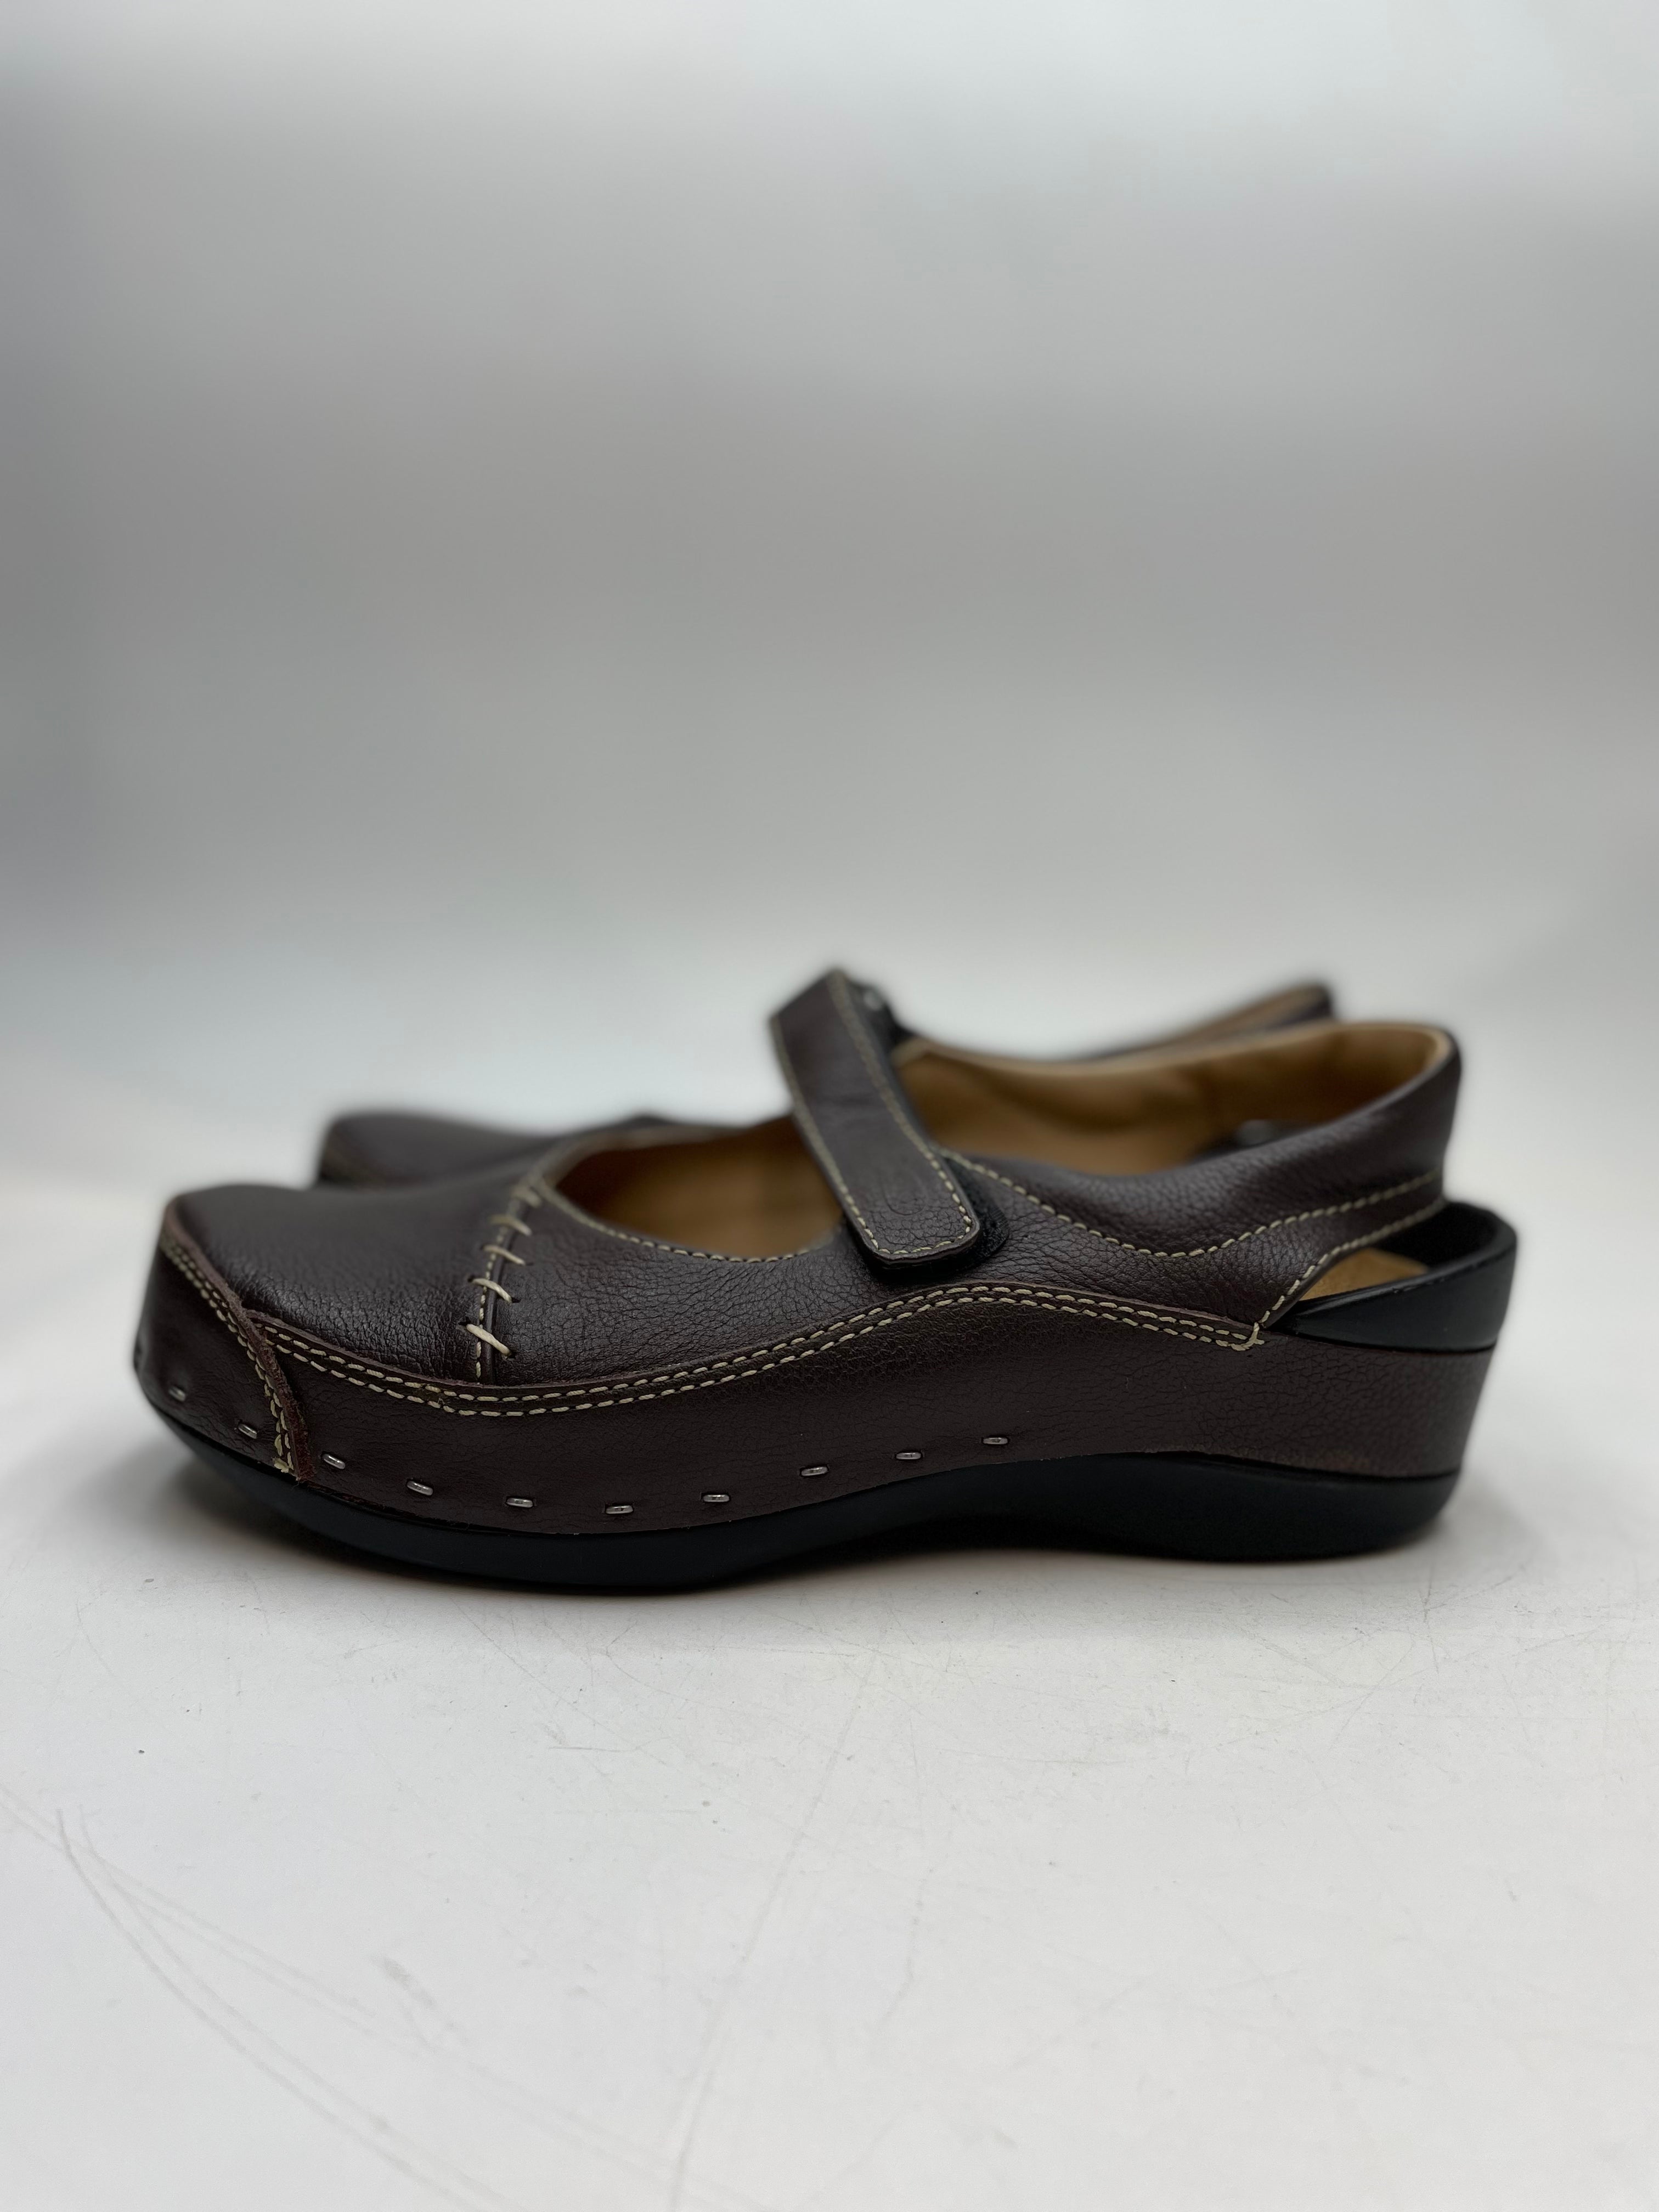 Wolky Strap Cloggy Clog *New*